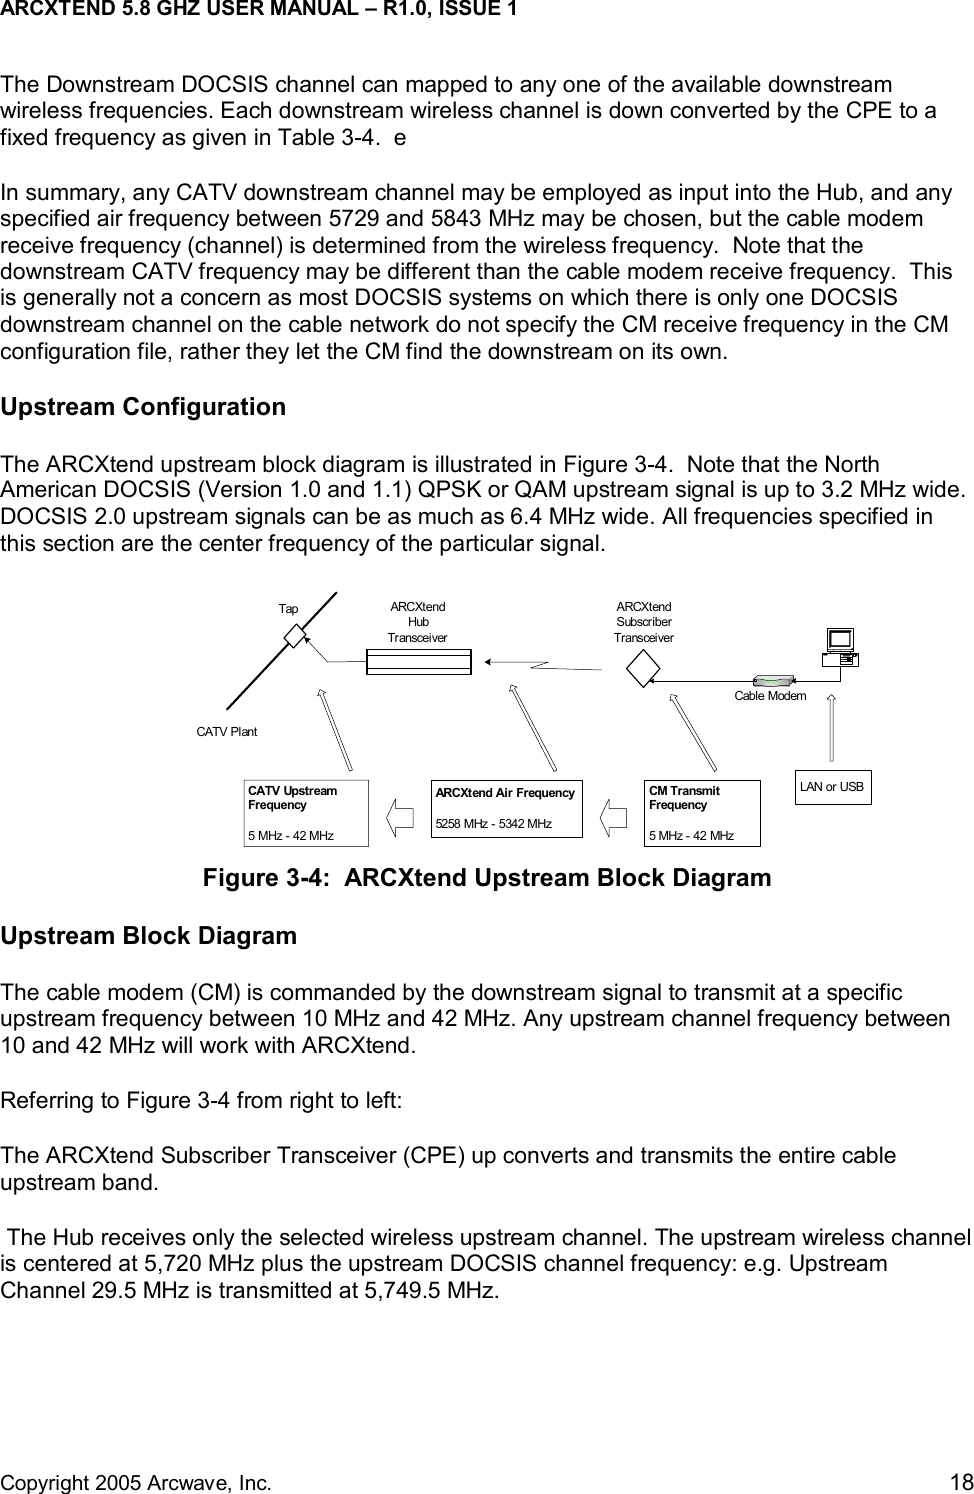 ARCXTEND 5.8 GHZ USER MANUAL – R1.0, ISSUE 1  Copyright 2005 Arcwave, Inc.    18 TapCATV PlantARCXtendSubscriberTransceiverCable ModemARCXtendHubTransceiverCATV UpstreamFrequency5 MHz - 42 MHzARCXtend Air Frequency5258 MHz - 5342 MHzCM TransmitFrequency5 MHz - 42 MHzLAN or USBThe Downstream DOCSIS channel can mapped to any one of the available downstream wireless frequencies. Each downstream wireless channel is down converted by the CPE to a fixed frequency as given in Table 3-4.  e  In summary, any CATV downstream channel may be employed as input into the Hub, and any specified air frequency between 5729 and 5843 MHz may be chosen, but the cable modem receive frequency (channel) is determined from the wireless frequency.  Note that the downstream CATV frequency may be different than the cable modem receive frequency.  This is generally not a concern as most DOCSIS systems on which there is only one DOCSIS downstream channel on the cable network do not specify the CM receive frequency in the CM configuration file, rather they let the CM find the downstream on its own.   Upstream Configuration The ARCXtend upstream block diagram is illustrated in Figure 3-4.  Note that the North American DOCSIS (Version 1.0 and 1.1) QPSK or QAM upstream signal is up to 3.2 MHz wide.  DOCSIS 2.0 upstream signals can be as much as 6.4 MHz wide. All frequencies specified in this section are the center frequency of the particular signal. Figure 3-4:  ARCXtend Upstream Block Diagram Upstream Block Diagram The cable modem (CM) is commanded by the downstream signal to transmit at a specific upstream frequency between 10 MHz and 42 MHz. Any upstream channel frequency between 10 and 42 MHz will work with ARCXtend. Referring to Figure 3-4 from right to left:  The ARCXtend Subscriber Transceiver (CPE) up converts and transmits the entire cable upstream band.  The Hub receives only the selected wireless upstream channel. The upstream wireless channel is centered at 5,720 MHz plus the upstream DOCSIS channel frequency: e.g. Upstream Channel 29.5 MHz is transmitted at 5,749.5 MHz.   